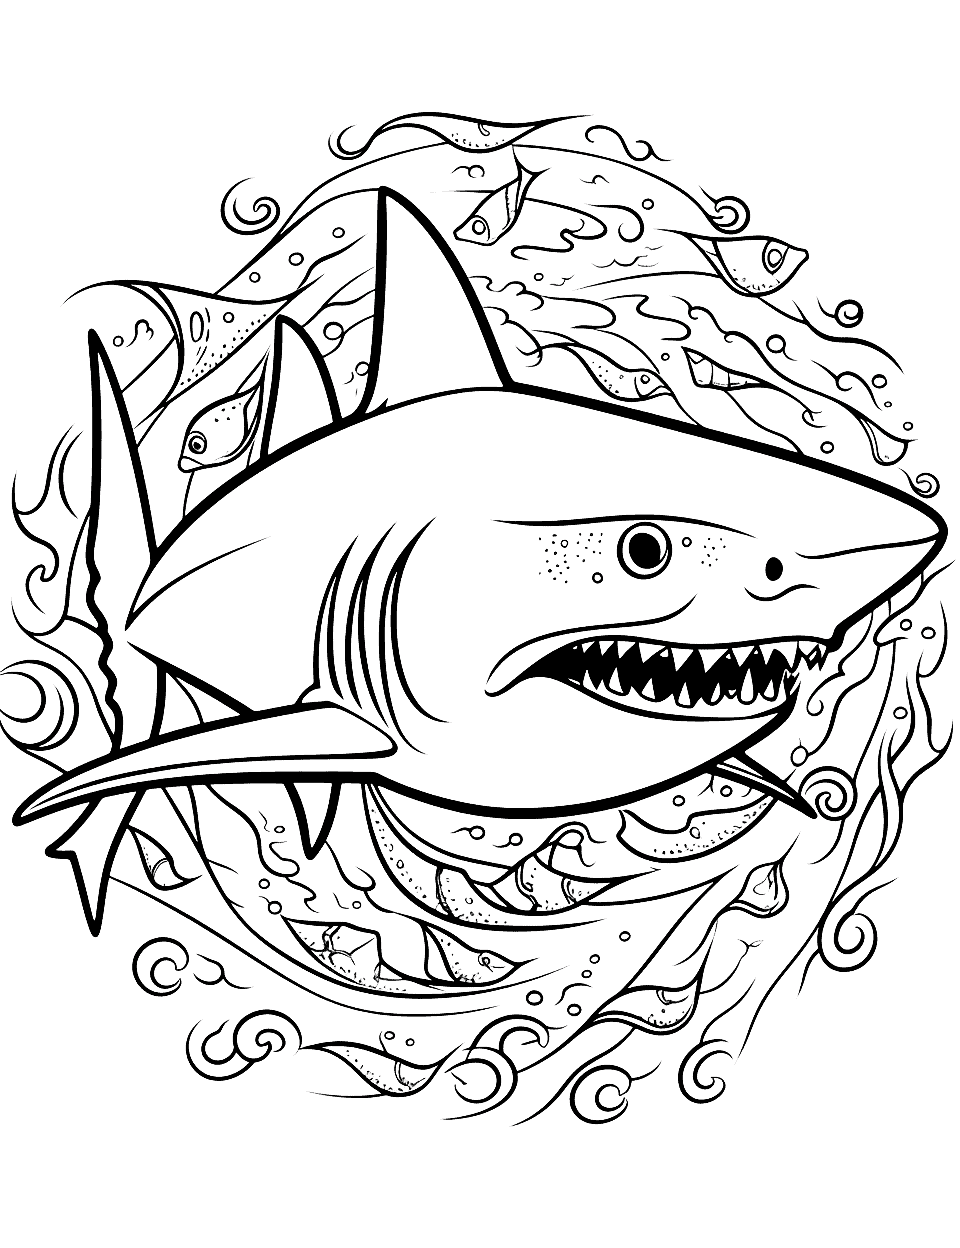 Shark Mandala Coloring Page - A complex mandala pattern with shark elements incorporated into it, suitable for older kids.